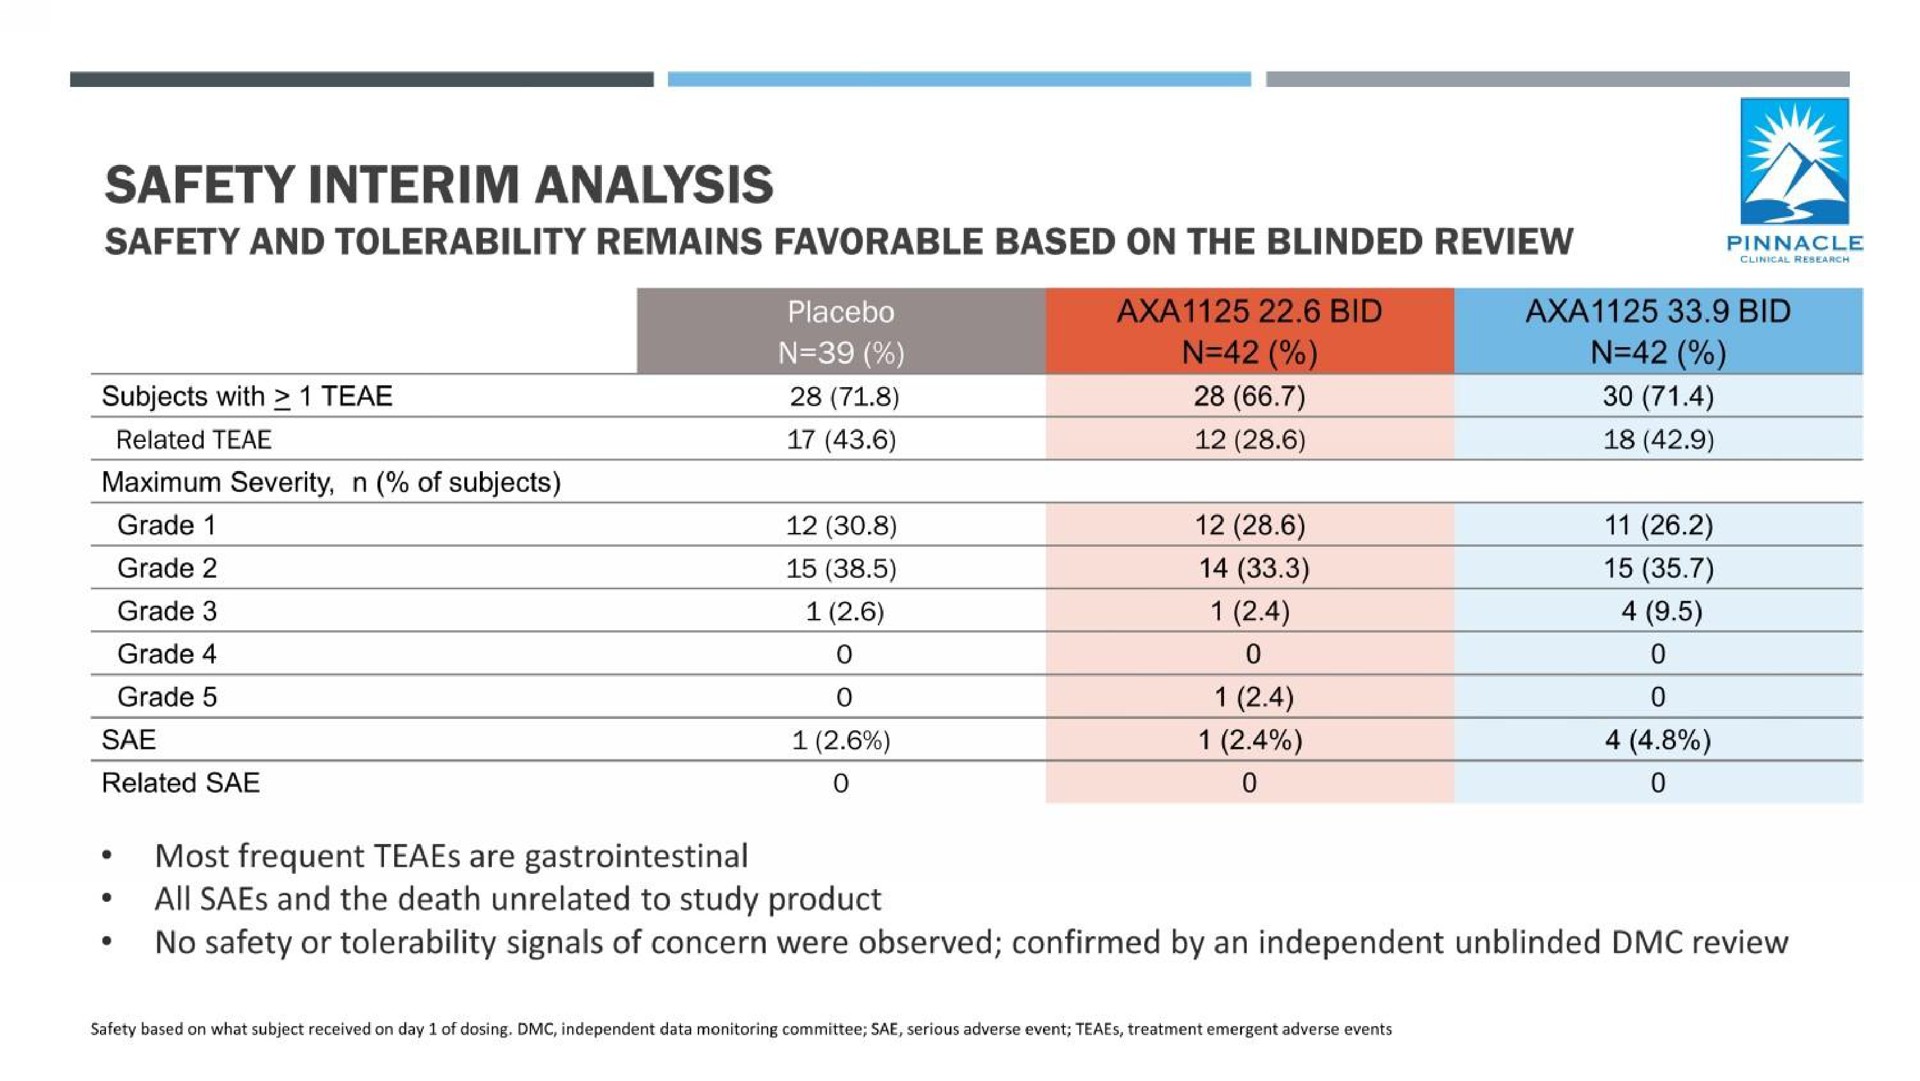 safety interim analysis safety and tolerability remains favorable based on the blinded review on pinnacle | Axcella Health